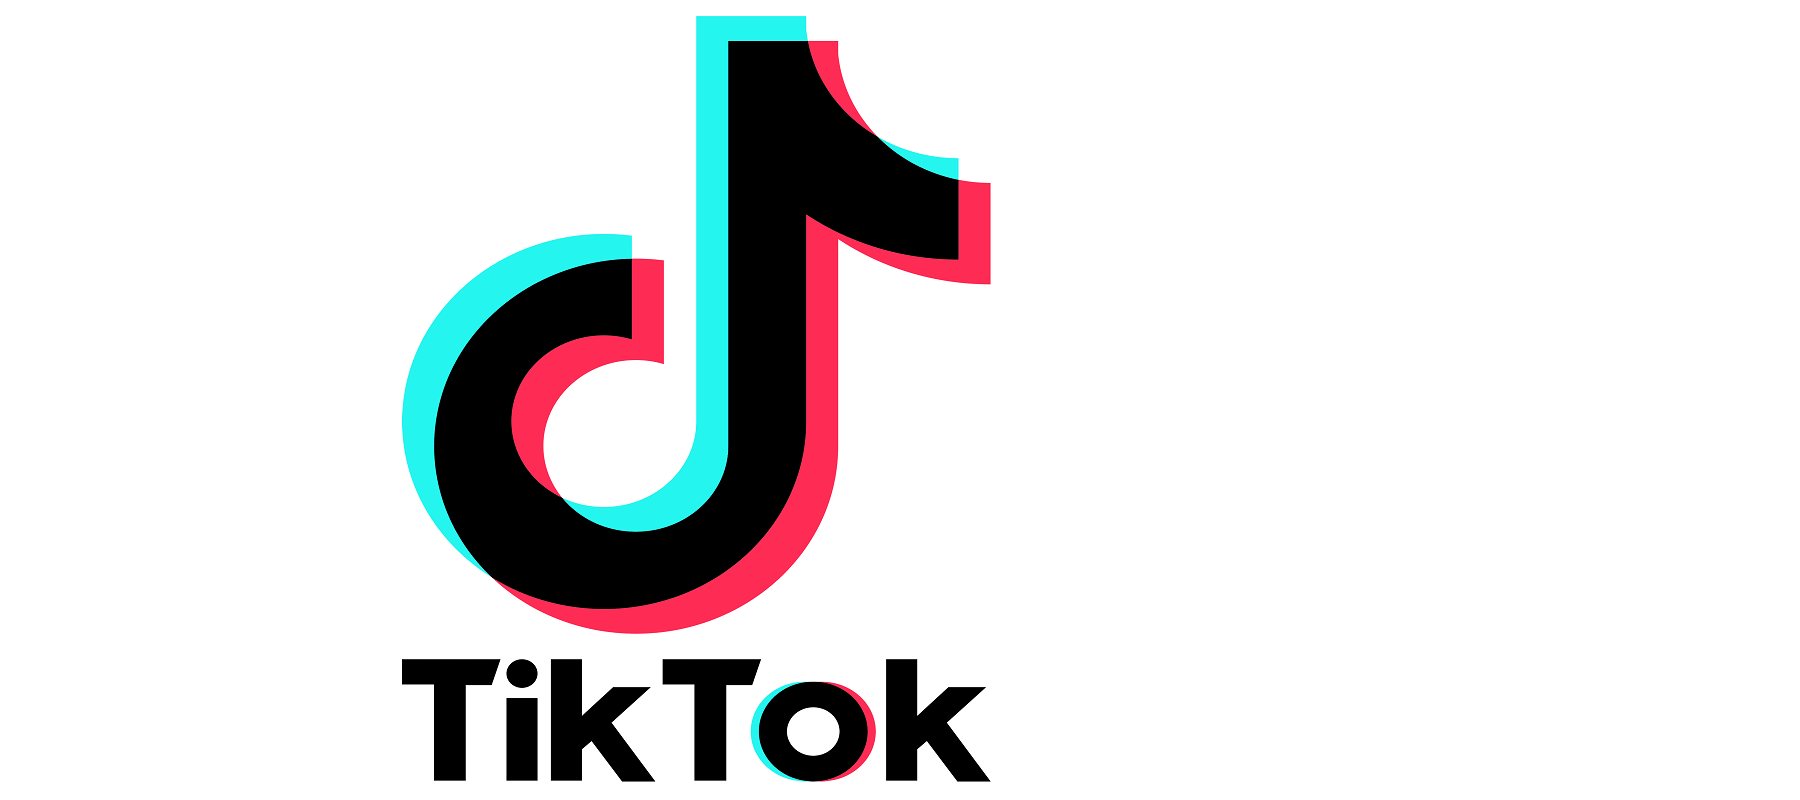 TikTok collaborates with the African Union Commission on digital safety campaign